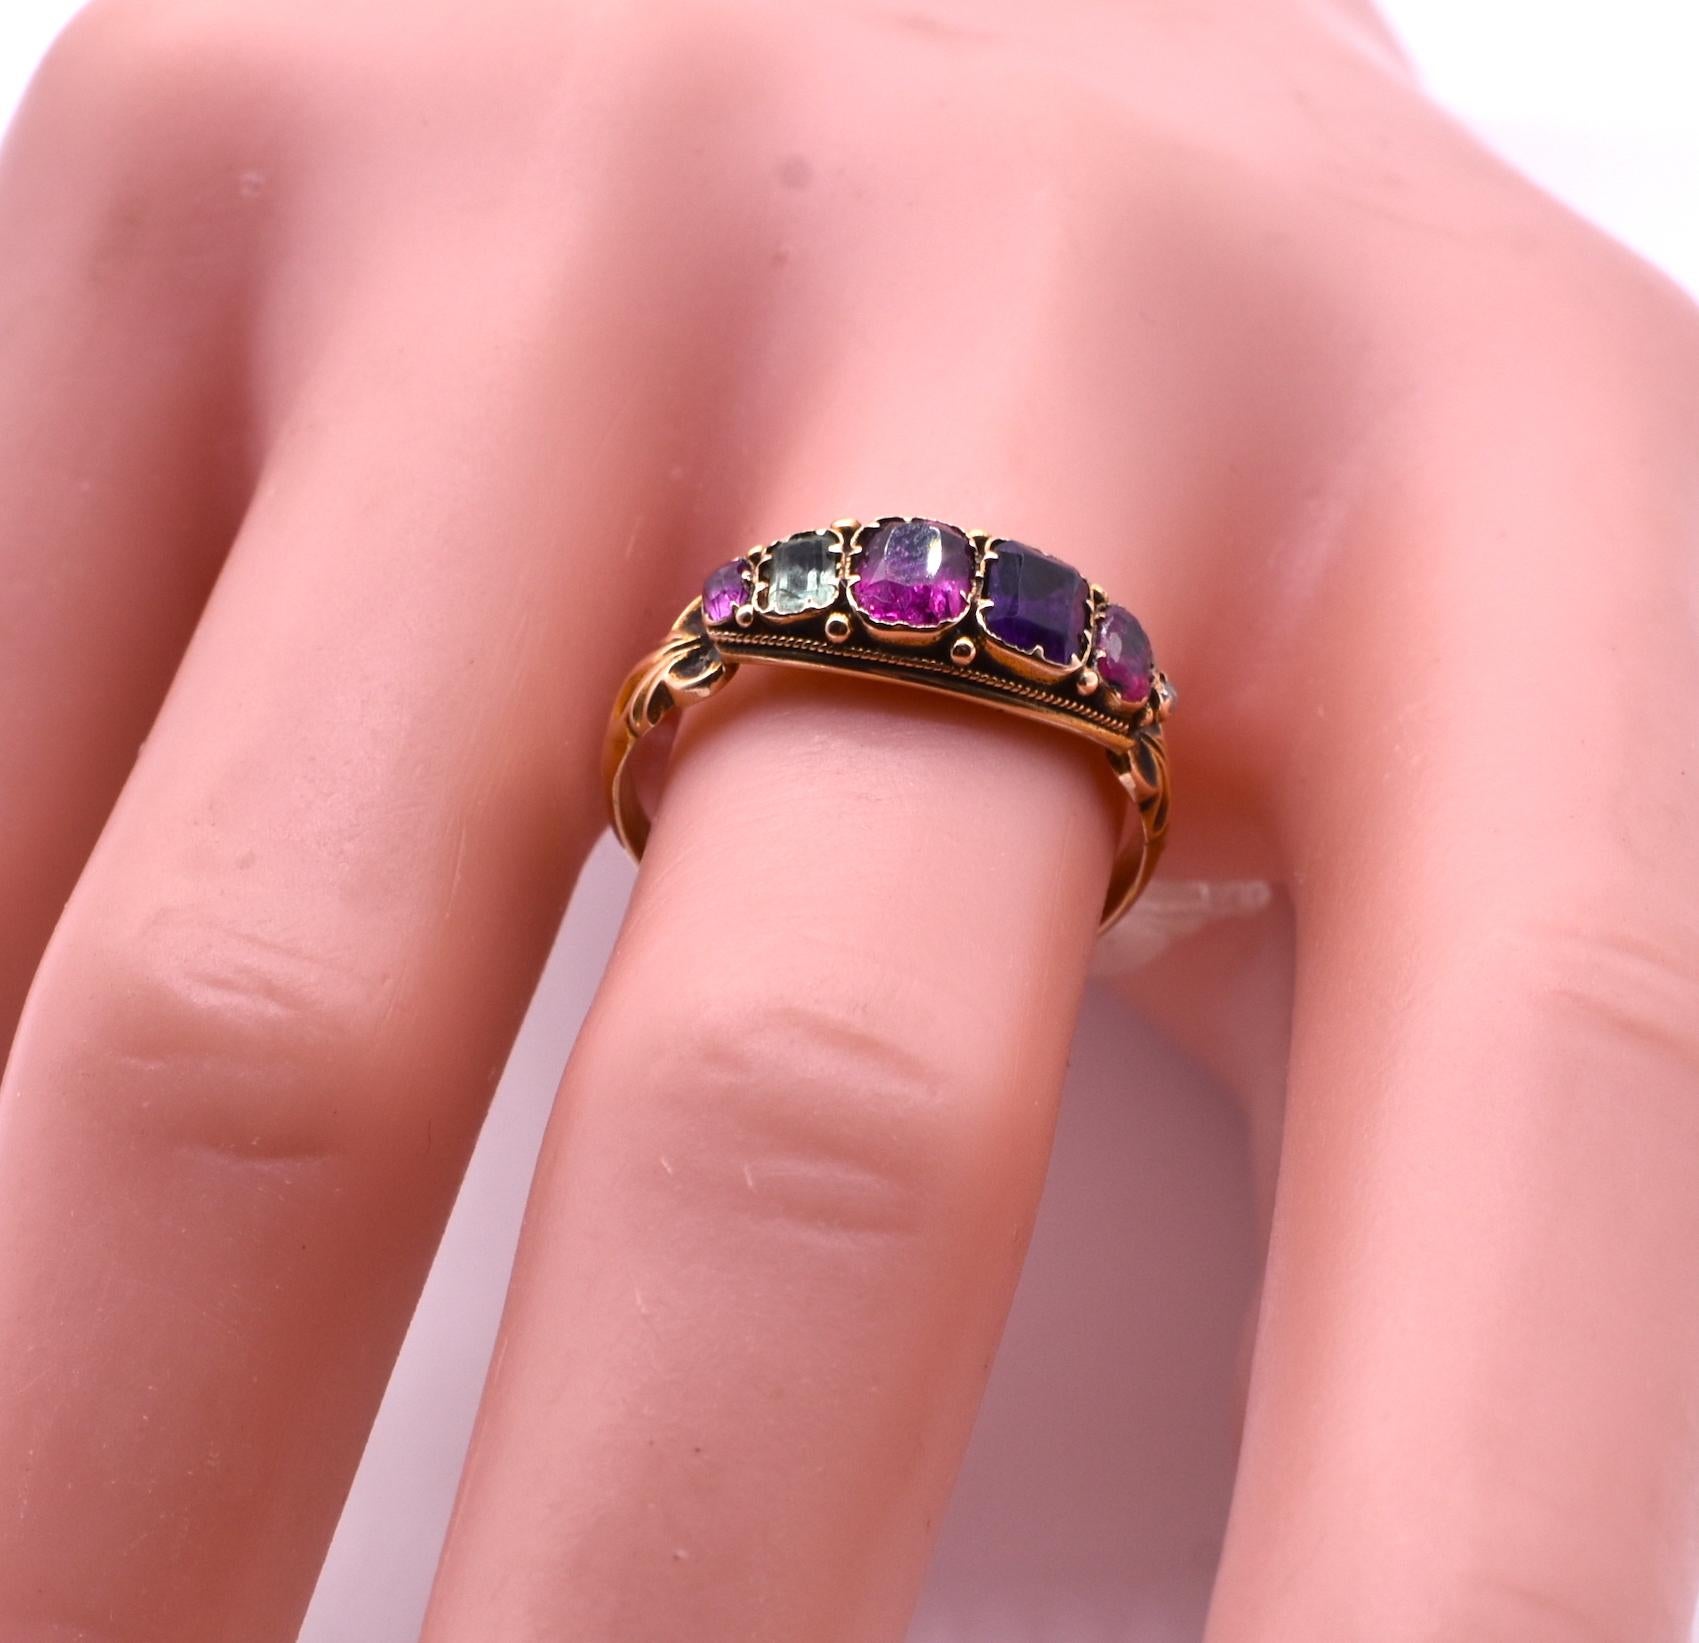 The Victorian Regard ring is a romantic  acrostic ring set with six gemstones in which the initial letter of each spells the word 'Regard': Ruby, Emerald, Garnet, Amethyst, Ruby, and Diamond. Our hard to find ring is 15k and hallmarked Birmingham